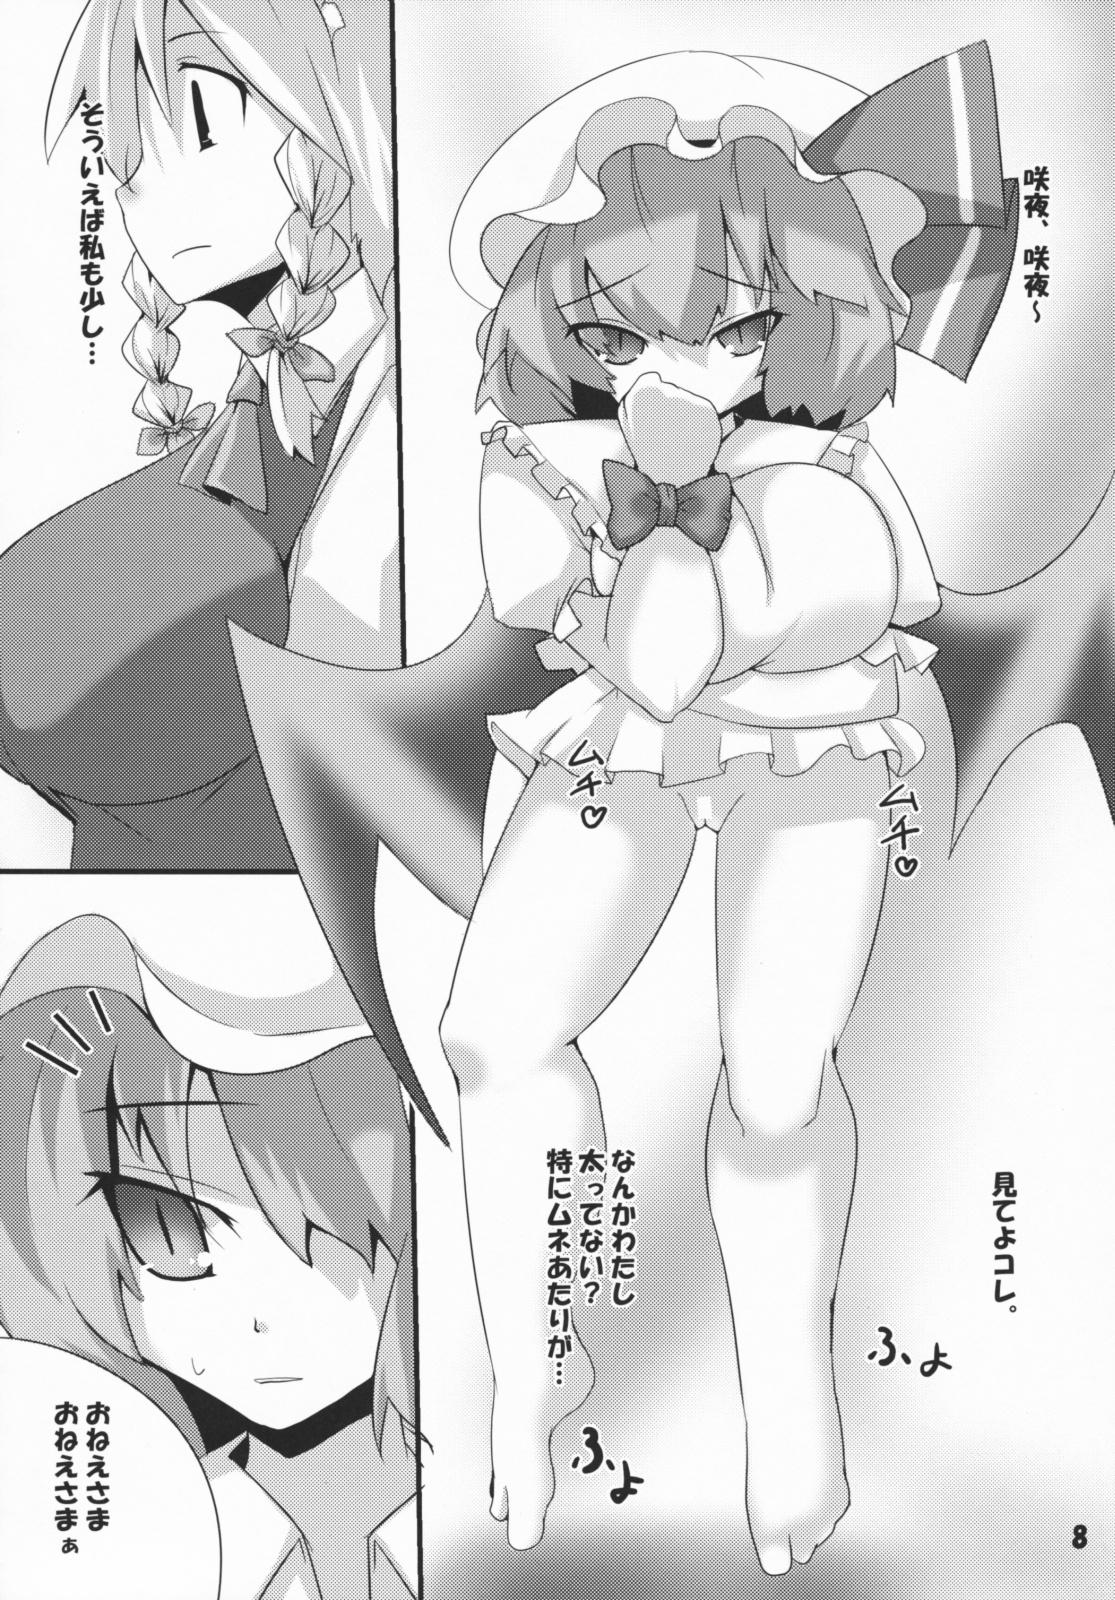 Creampies Mukyuu - Touhou project College - Page 8